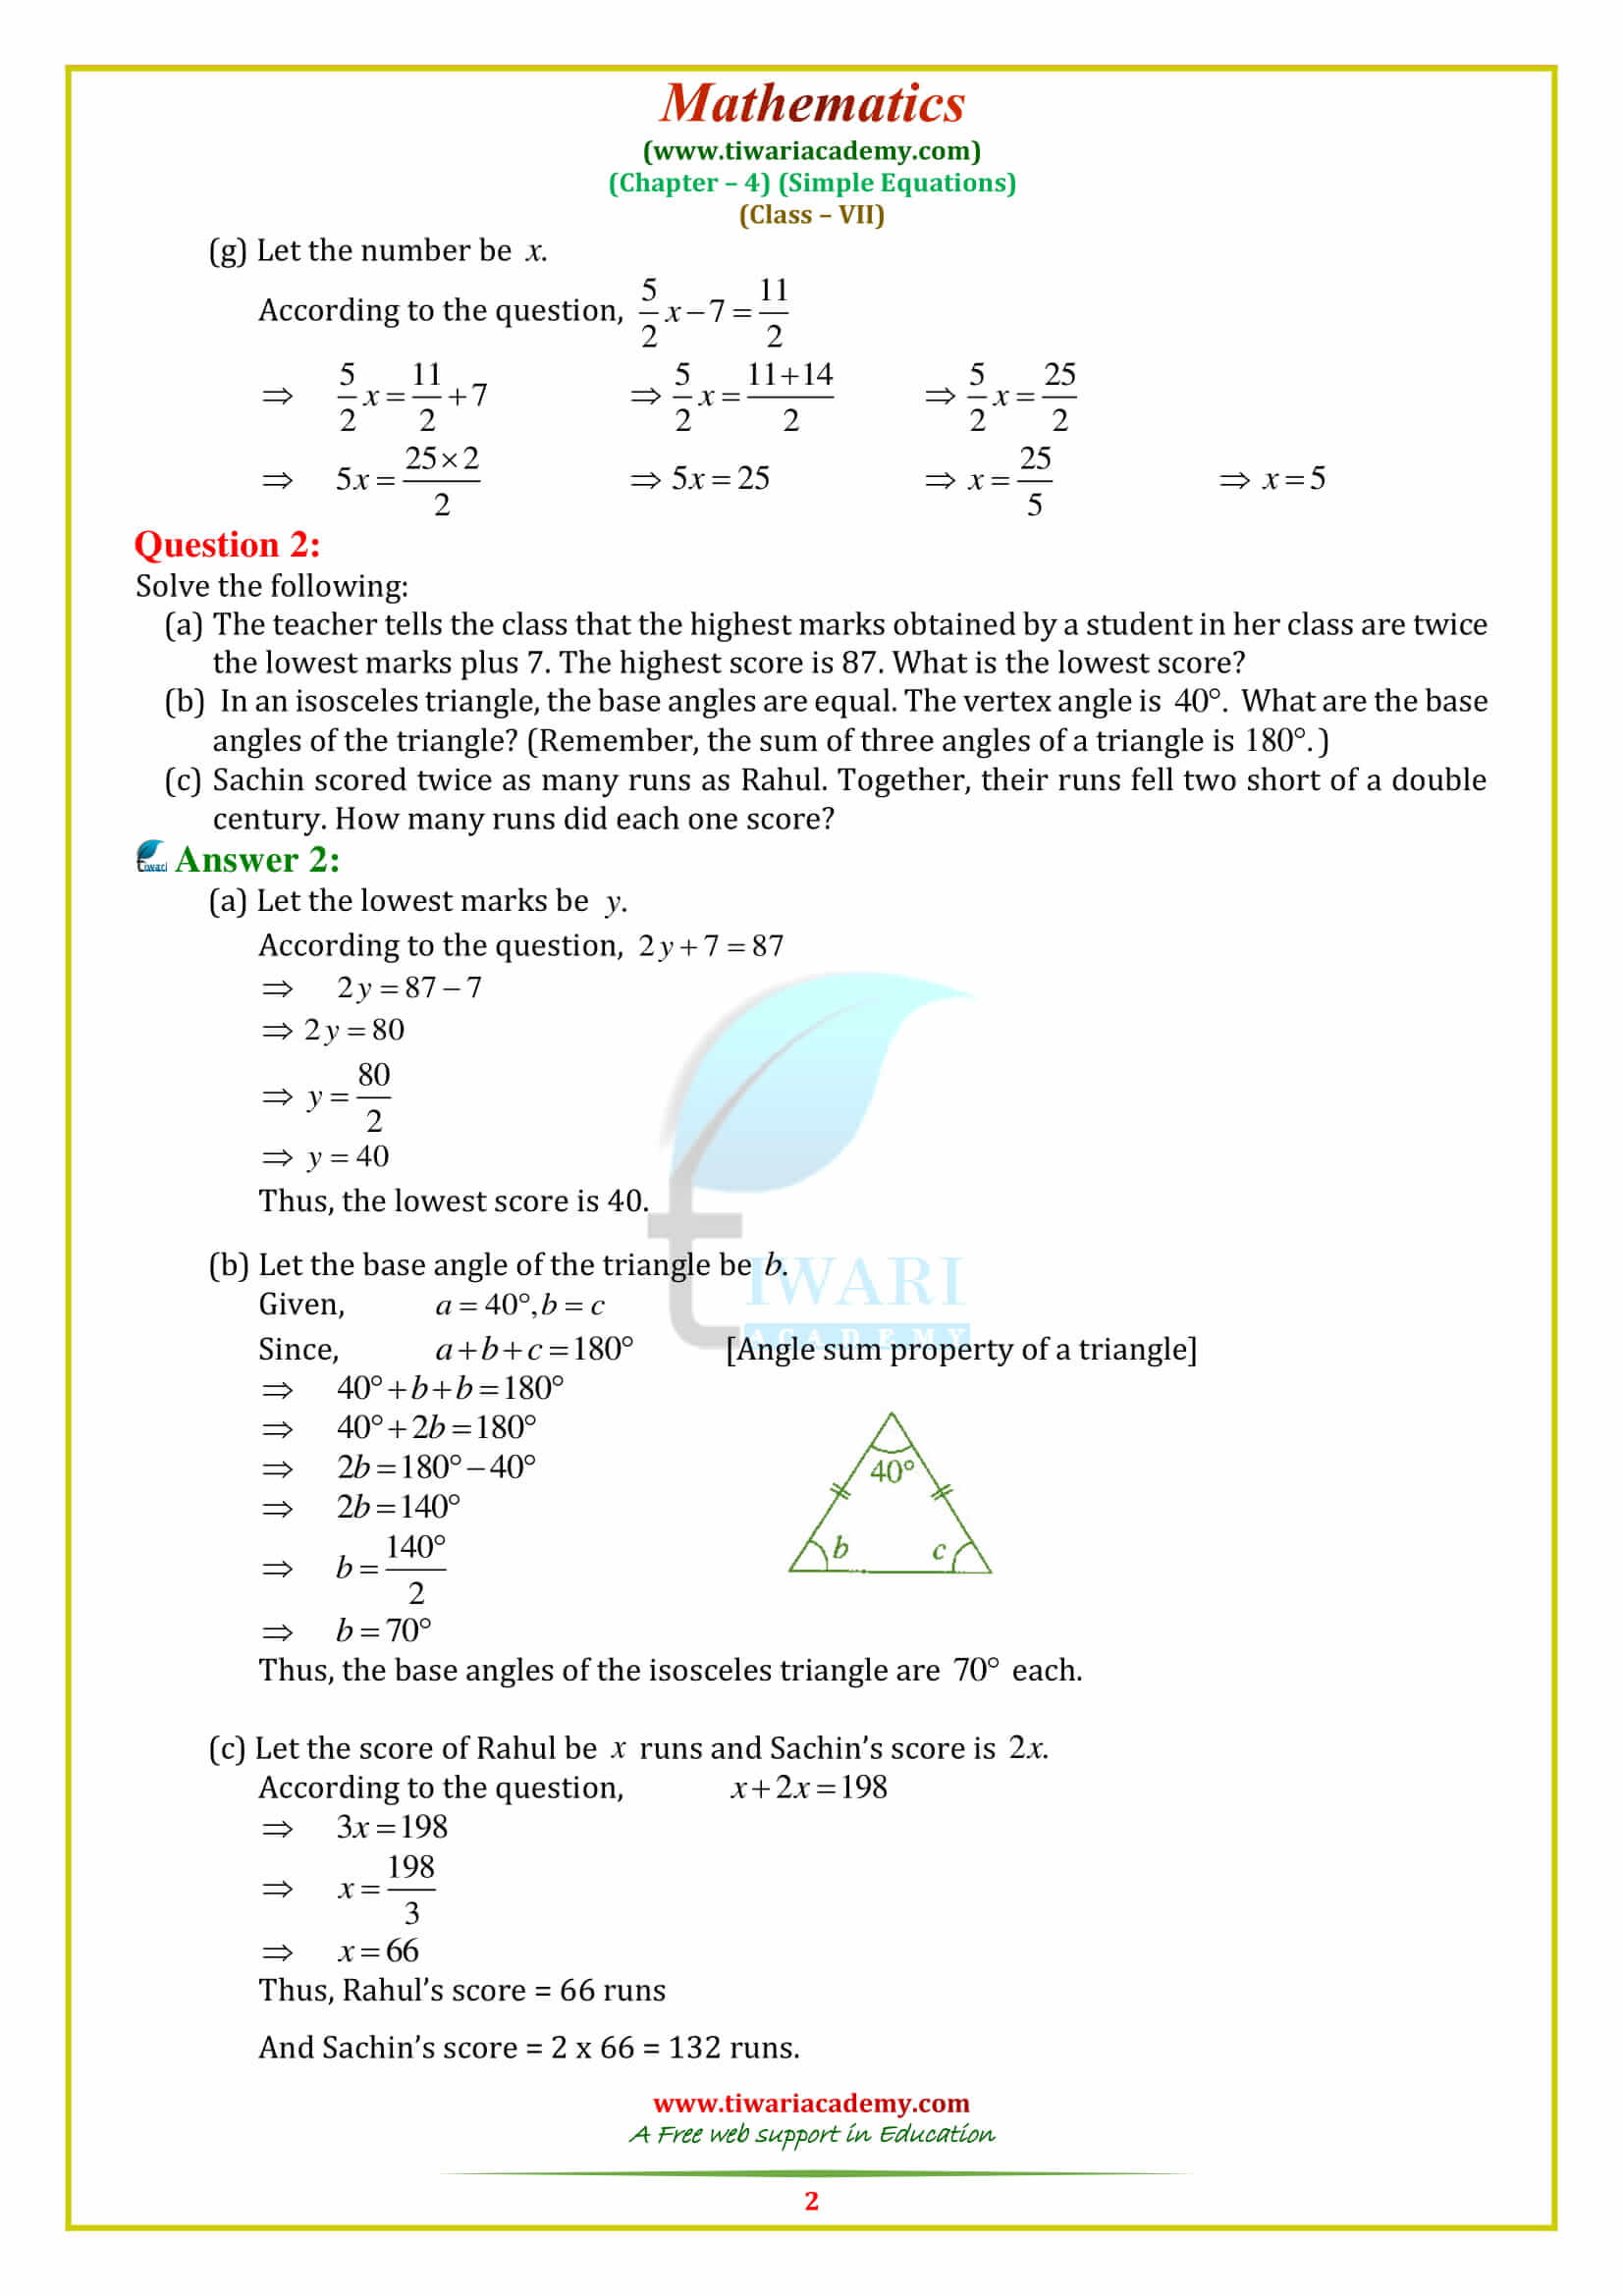 NCERT Solutions for Class 7 Maths Chapter 4 Exercise 4.4 in pdf